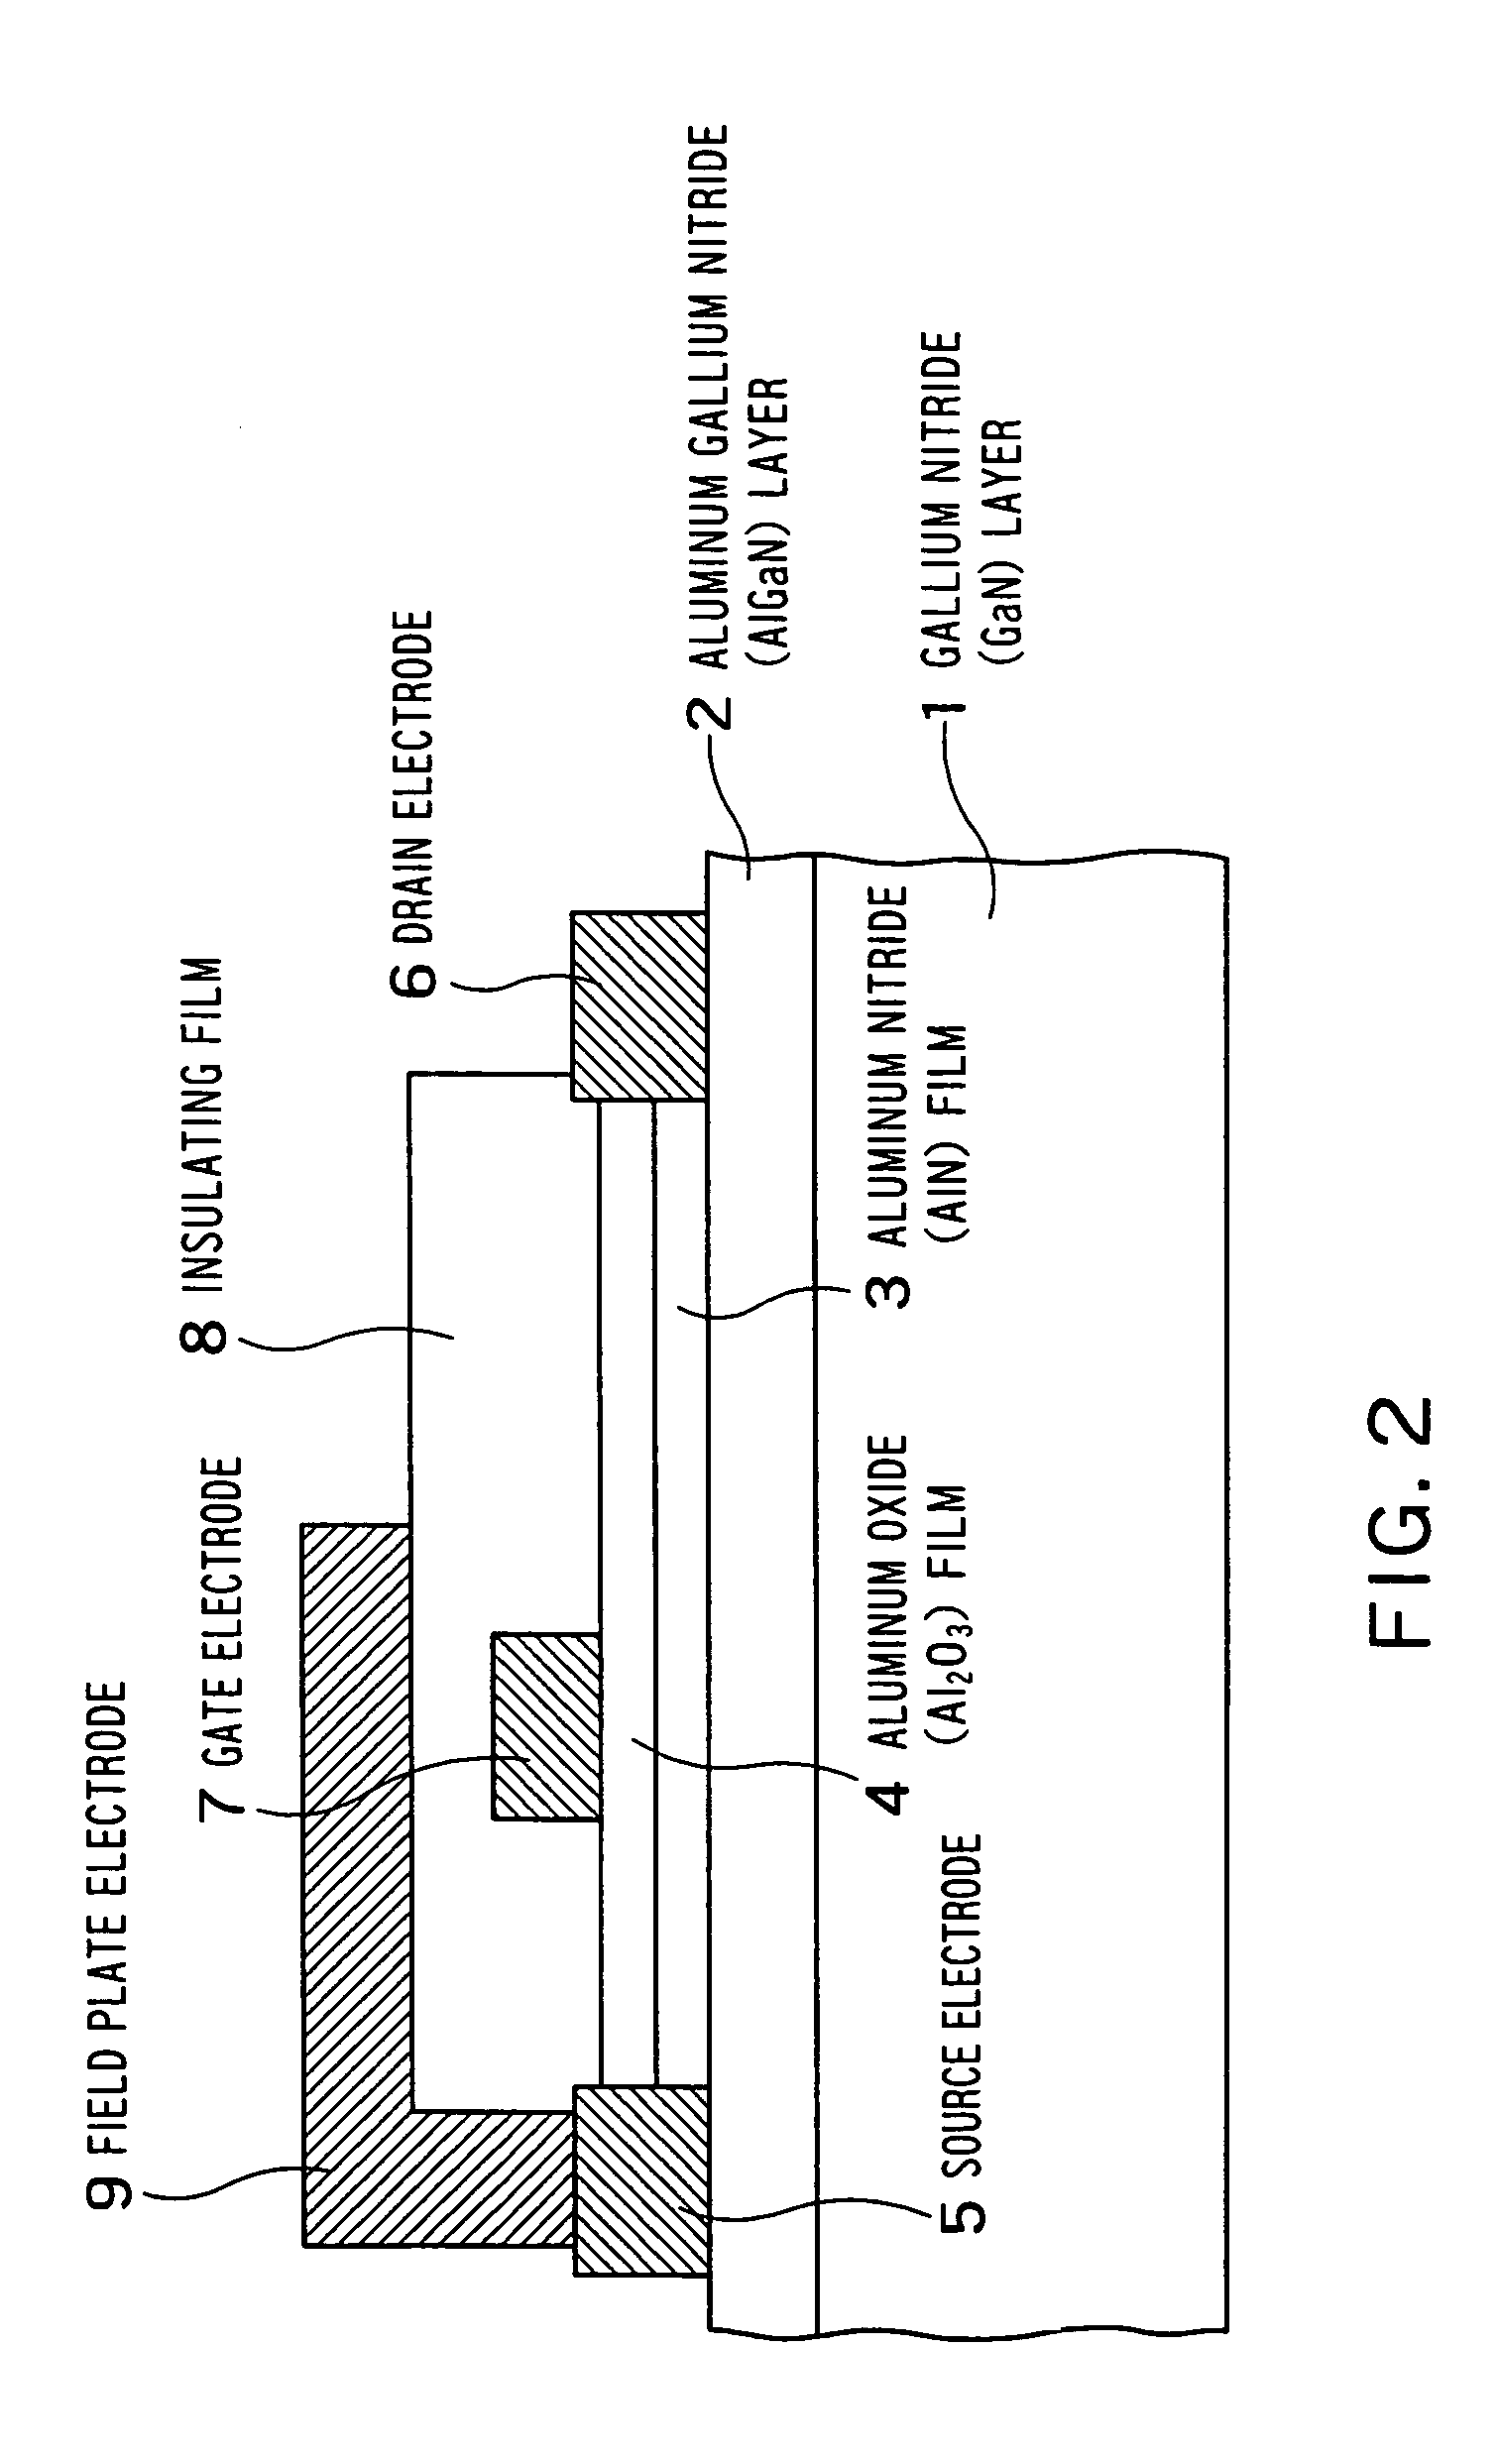 Nitride semiconductor device such as transverse power FET for high frequency signal amplification or power control